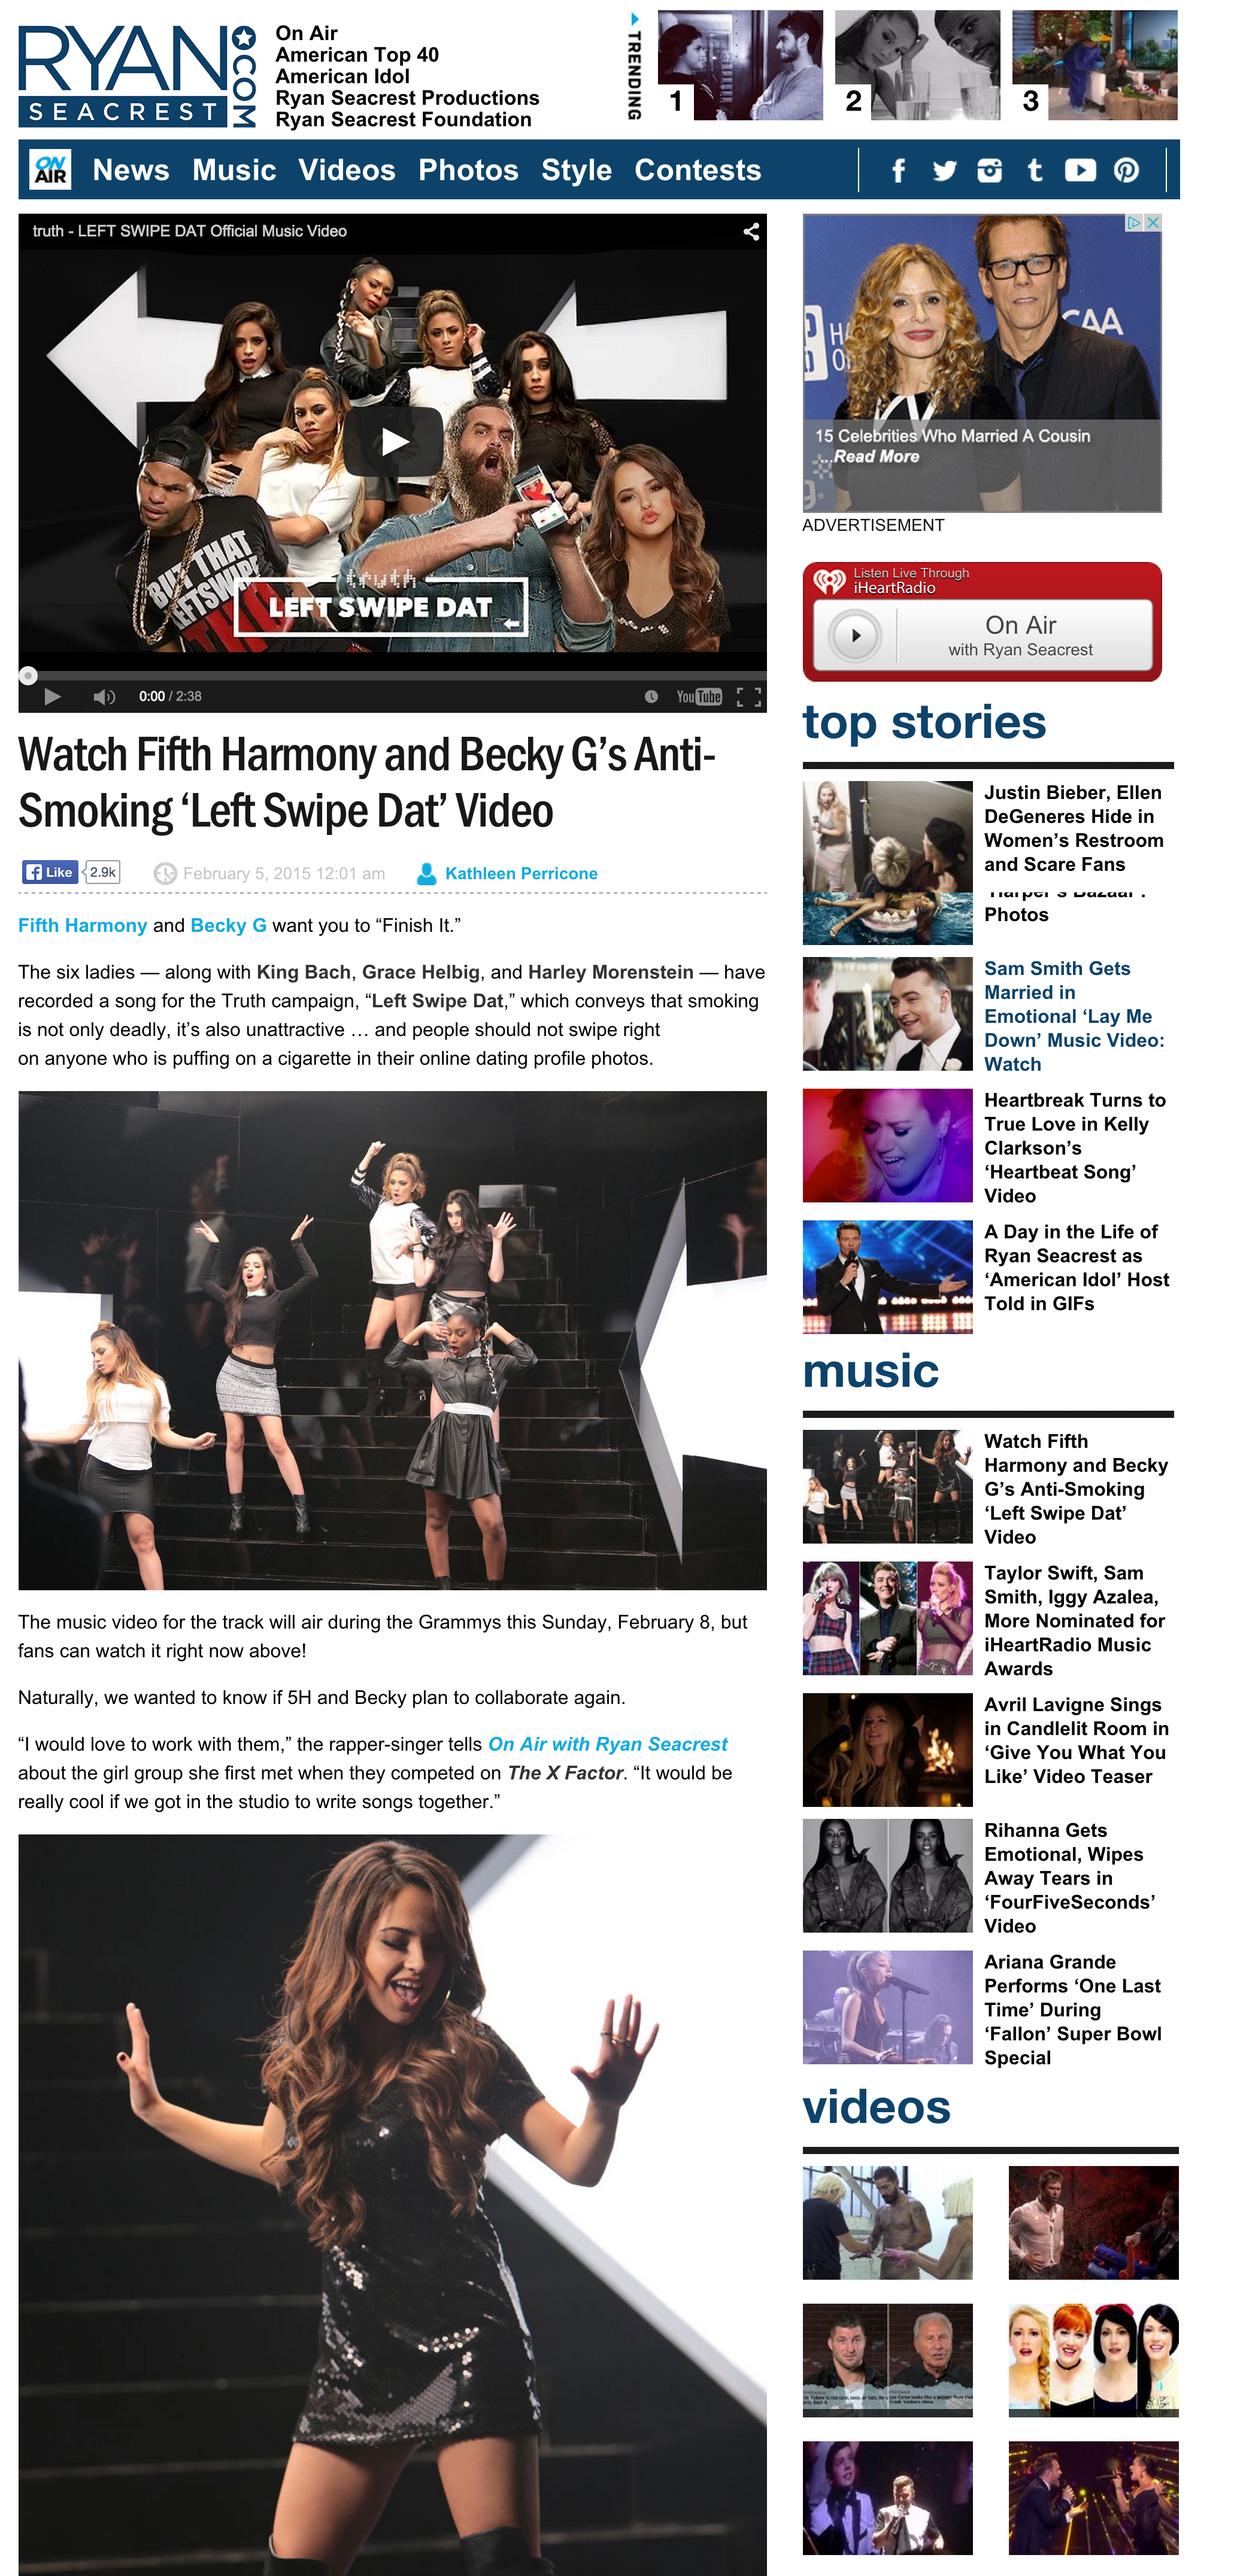 Ryan Seacrest - Watch Fifth Harmony and Becky G’s Anti-Smoking ‘Left Swipe Dat’ Video -.png